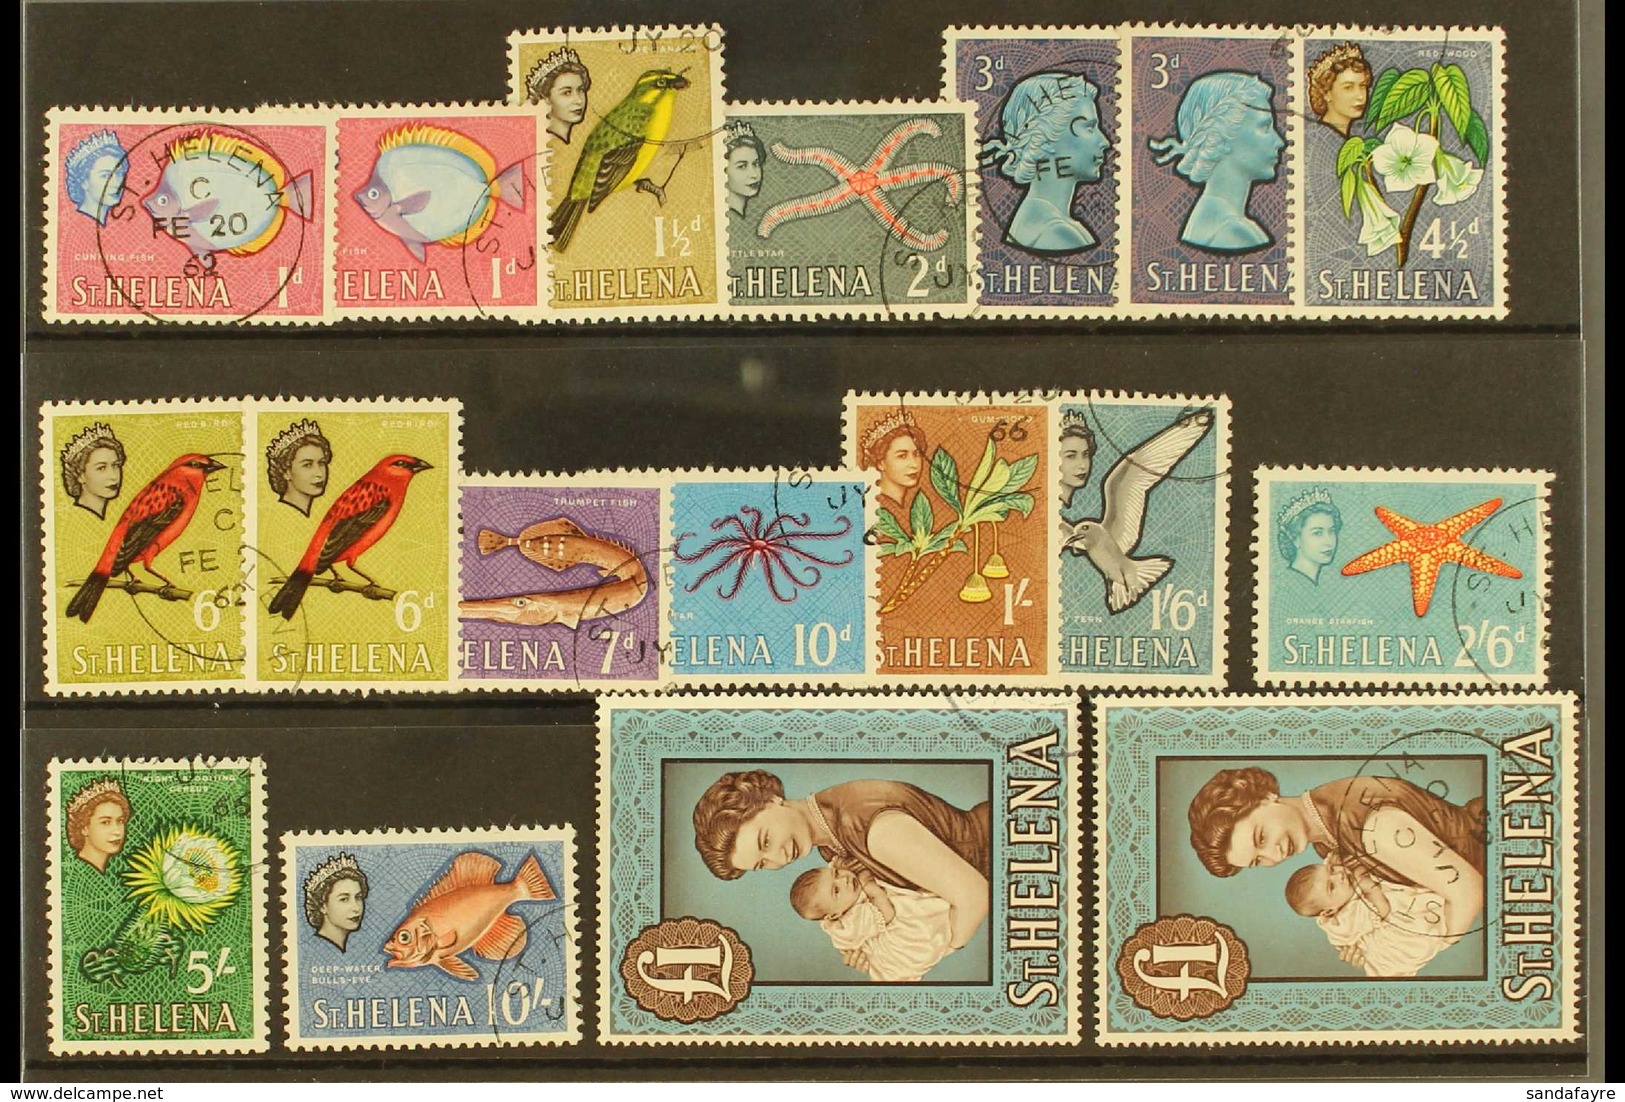 1961-65 Pictorial Definitive Set With Most Addition Chalky Paper Variants, SG 176/89, Fine Used (18 Stamps) For More Ima - Saint Helena Island